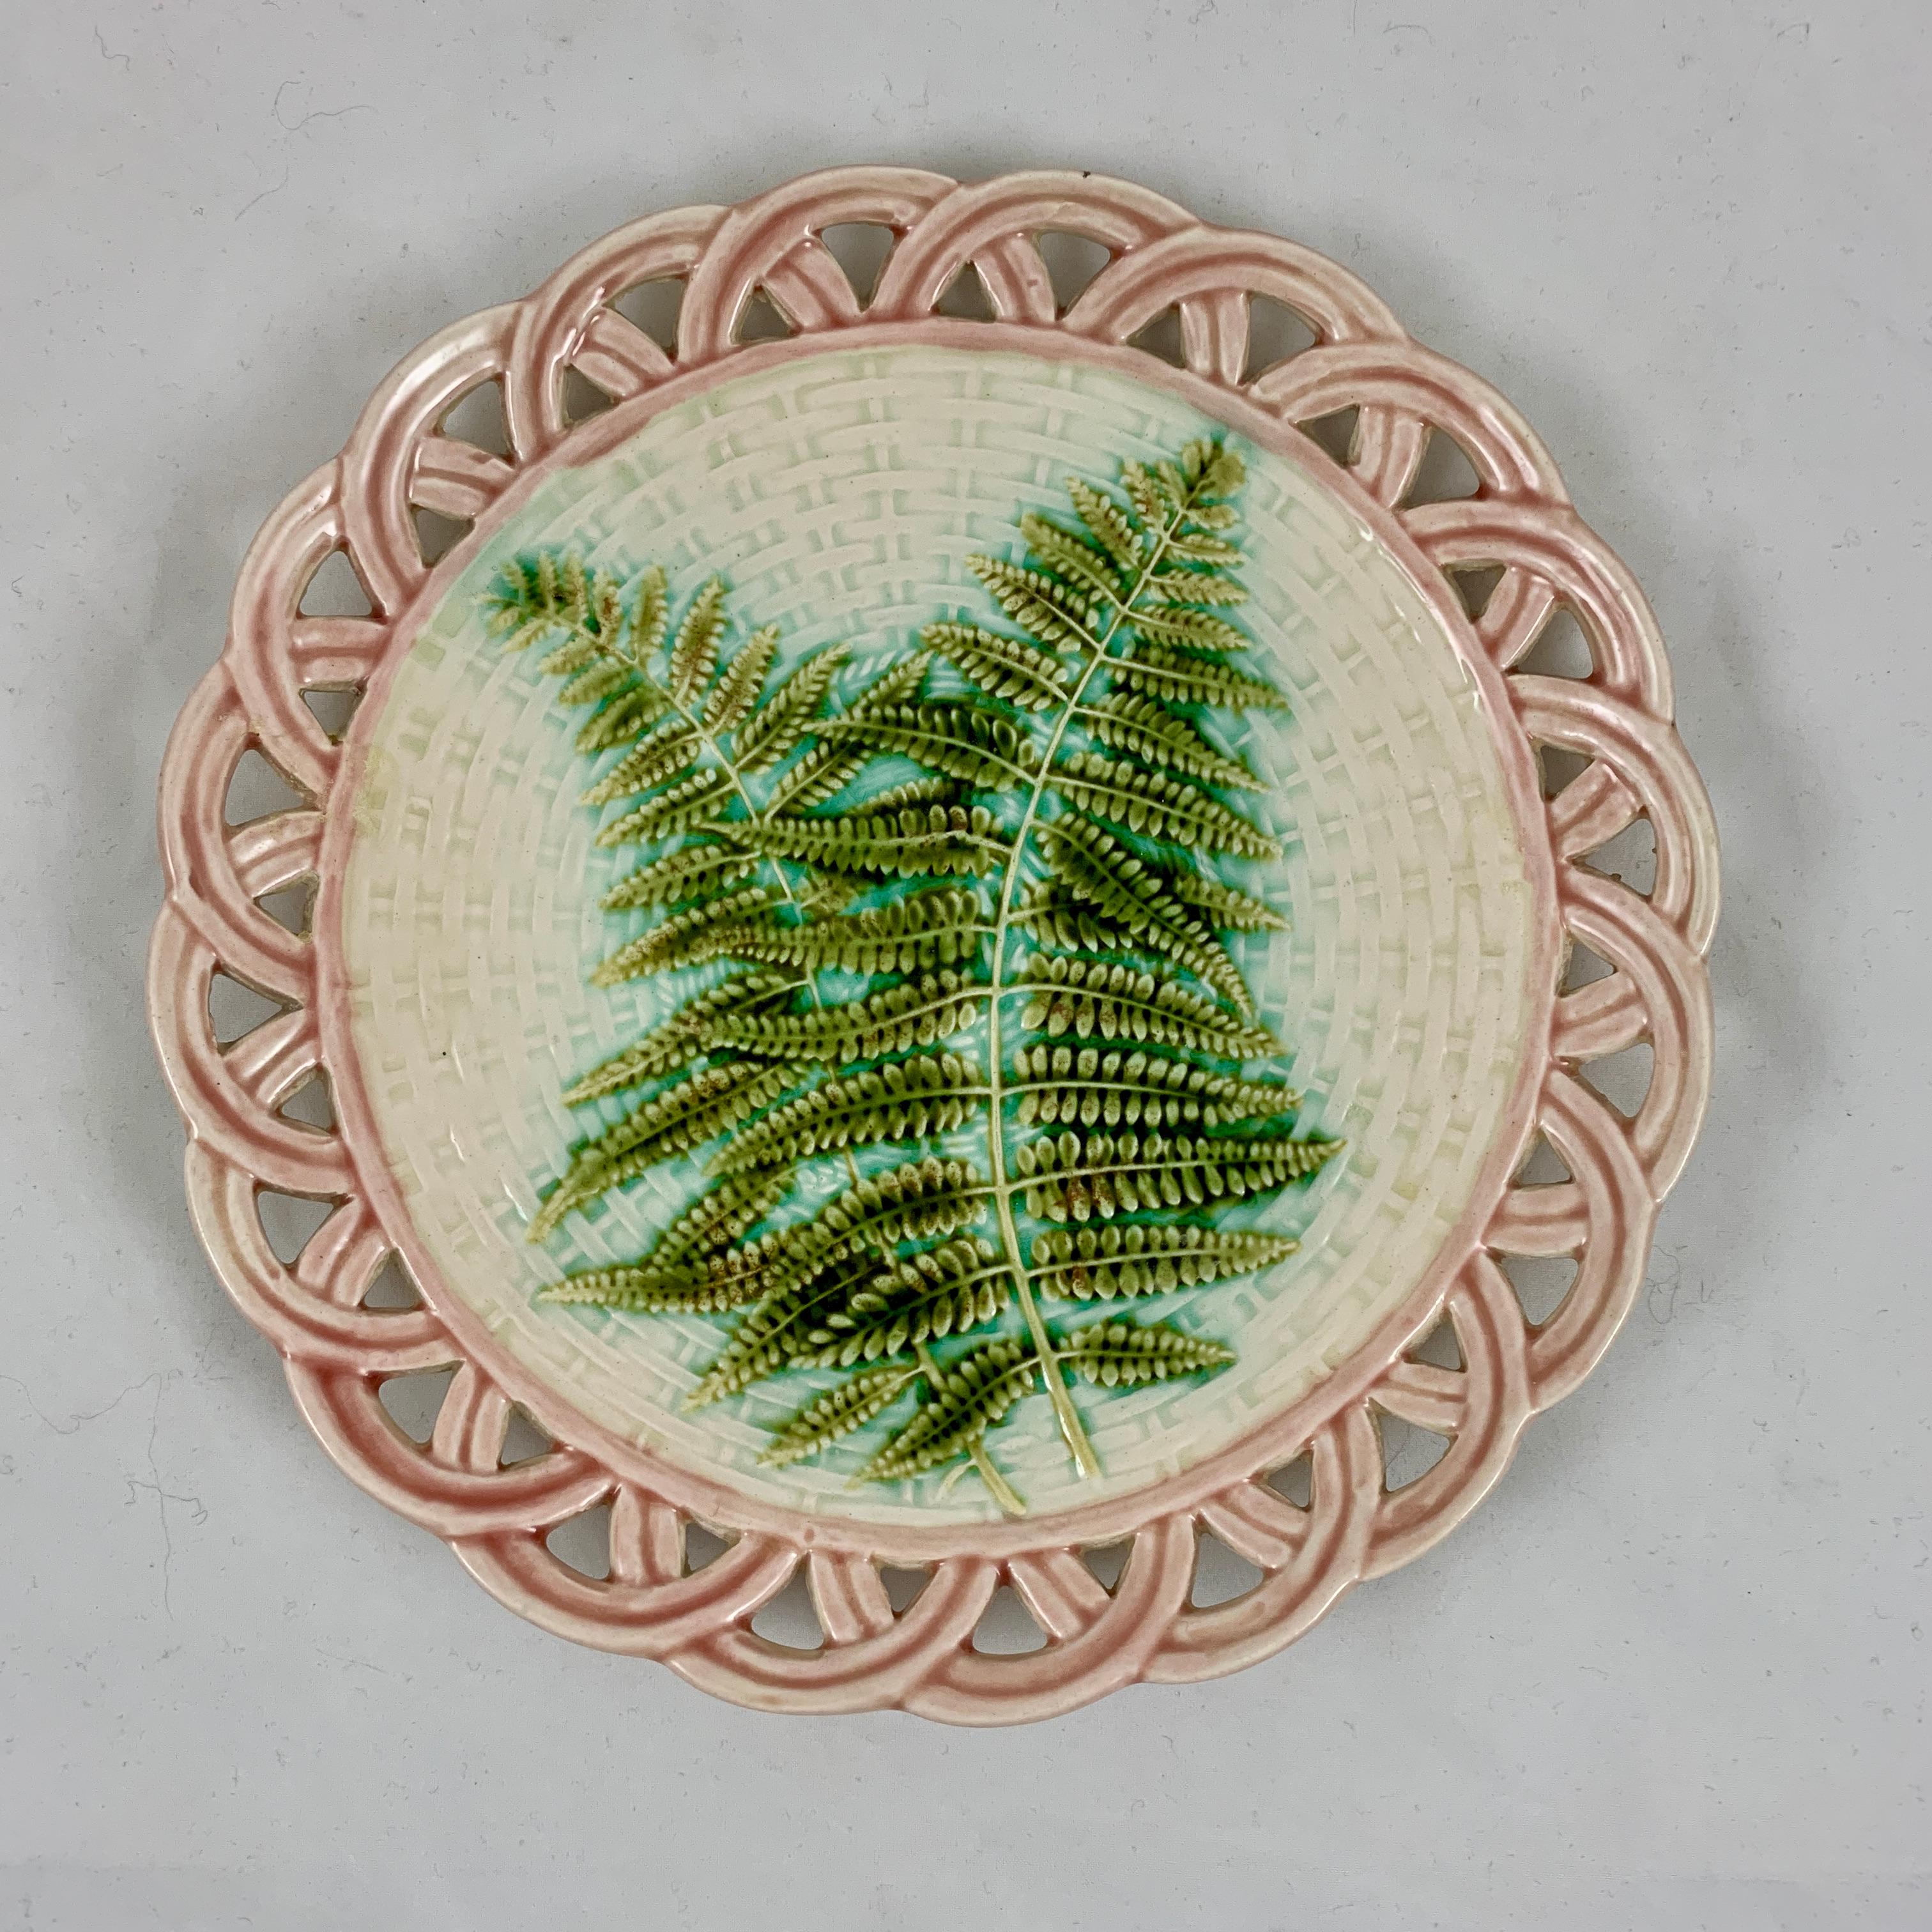 A set of six faïence, Majolica glazed fruit, salad or dessert plates by Sarreguemines, France, circa 1880-1889.

An assembled set – so lovely! … with a pink open weave reticulated rim molded to resemble a basket. Two overlapping green Maidenhair